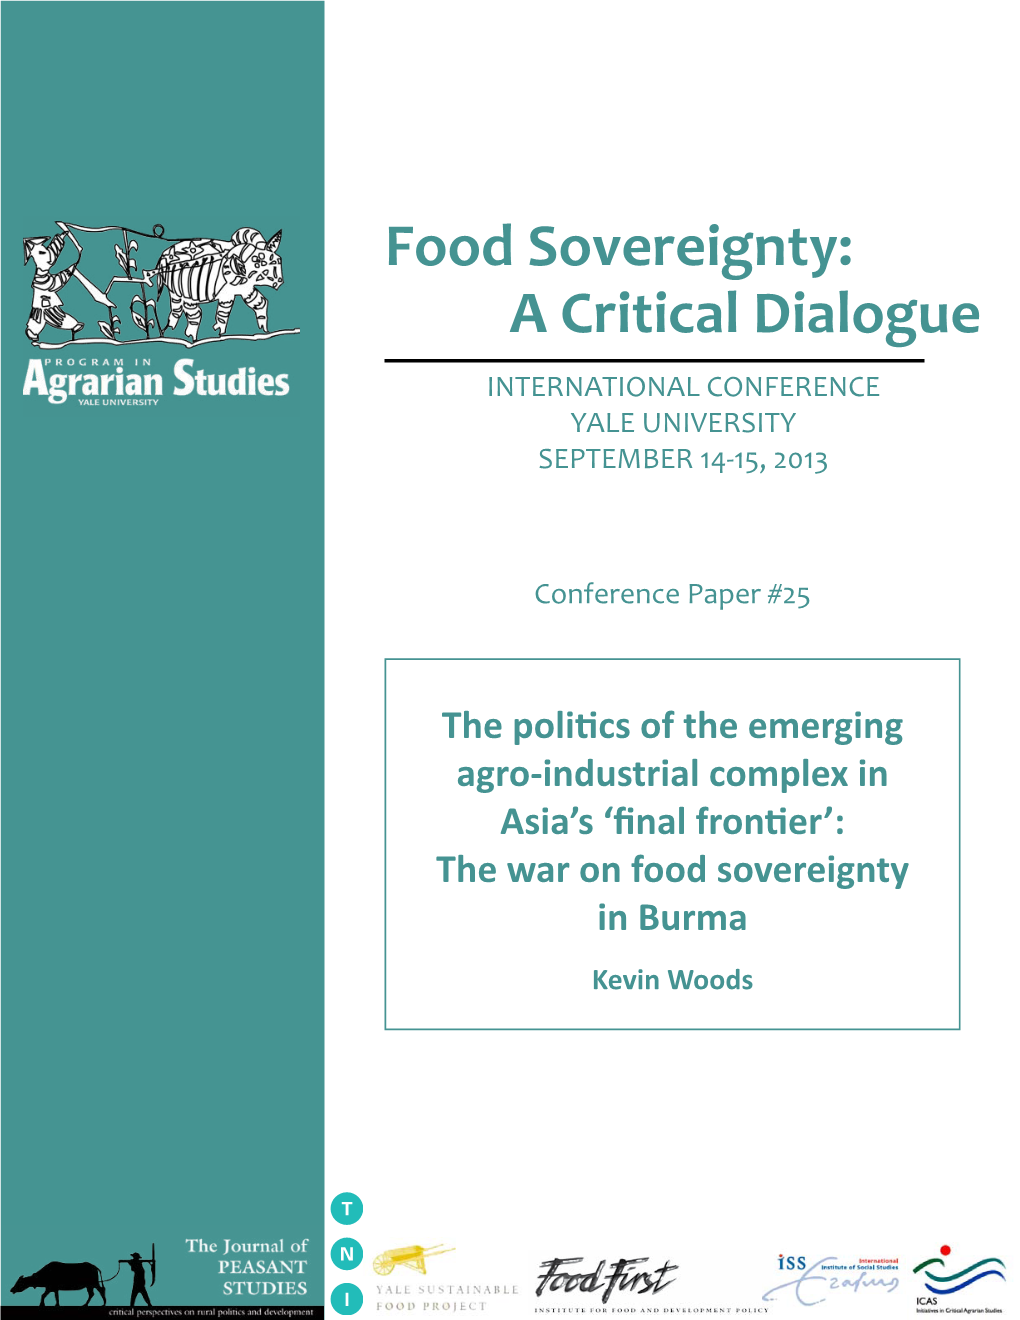 Food Sovereignty: a Critical Dialogue INTERNATIONAL CONFERENCE YALE UNIVERSITY SEPTEMBER 14-15, 2013